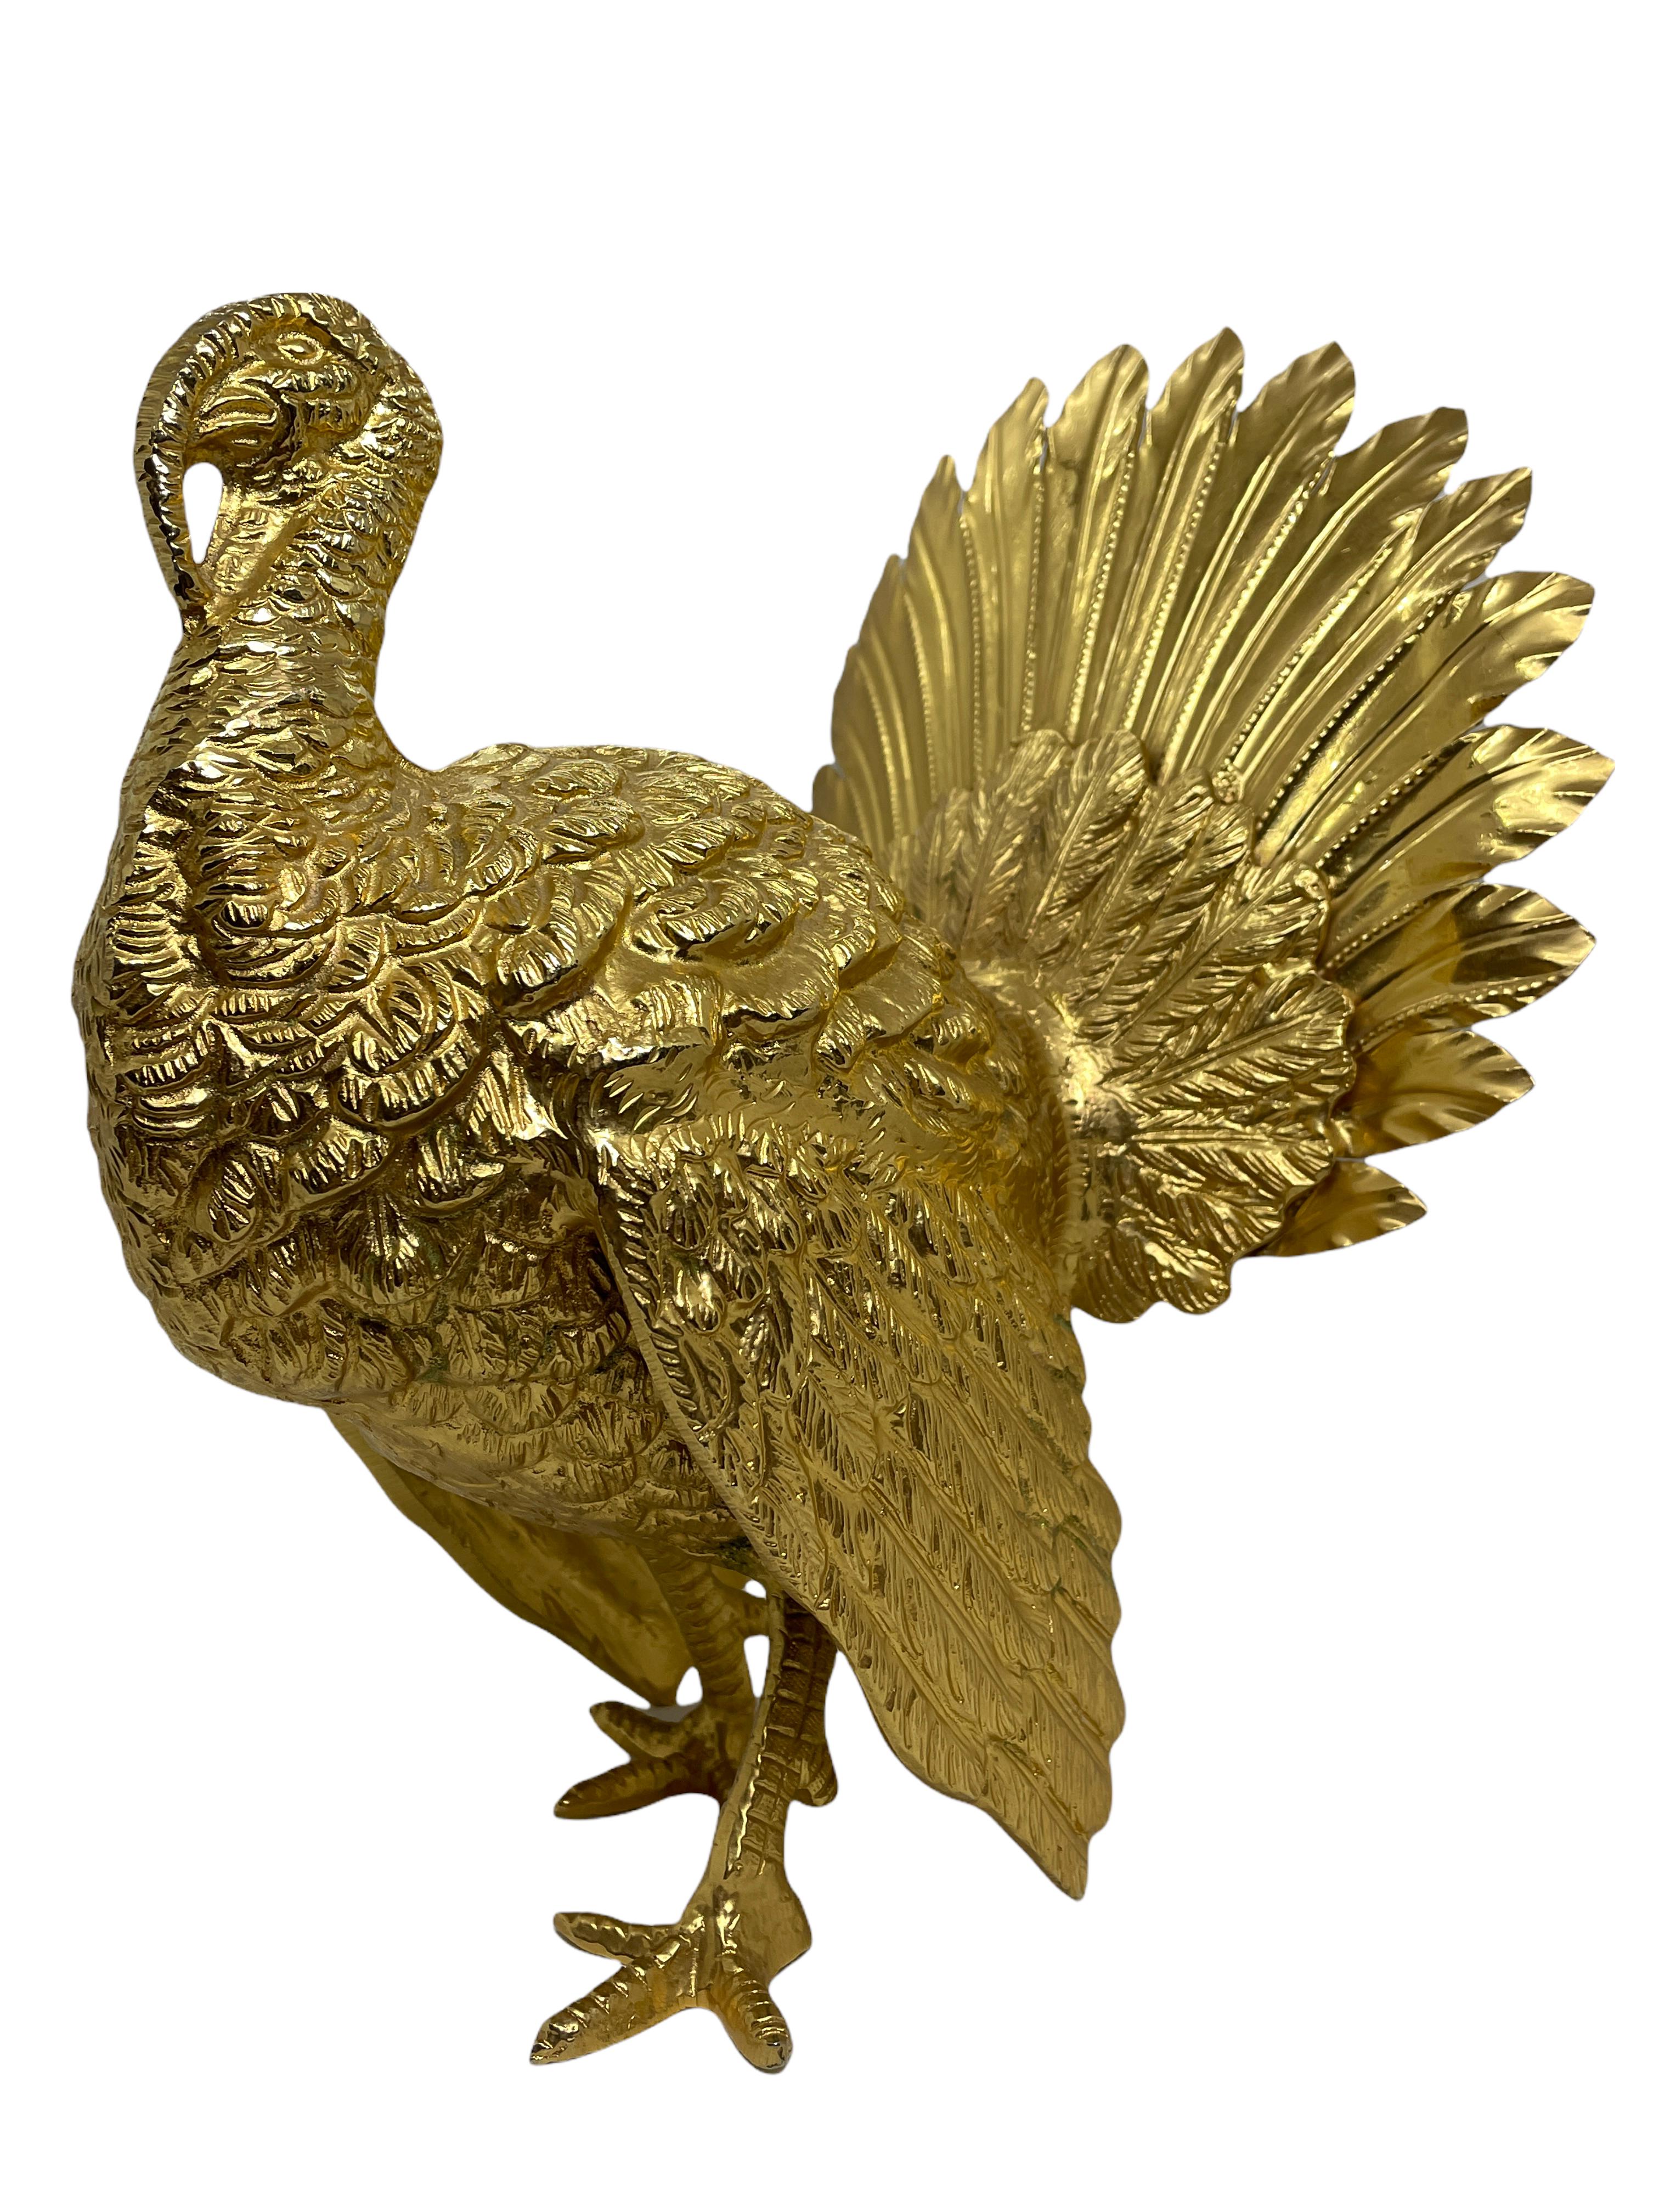 A beautiful decorative turkey statue. Some wear with a nice patina, but this is old-age. Gold plated metal. Very decorative and nice to display in your library or any room. Nice Thanksgiving decoration.